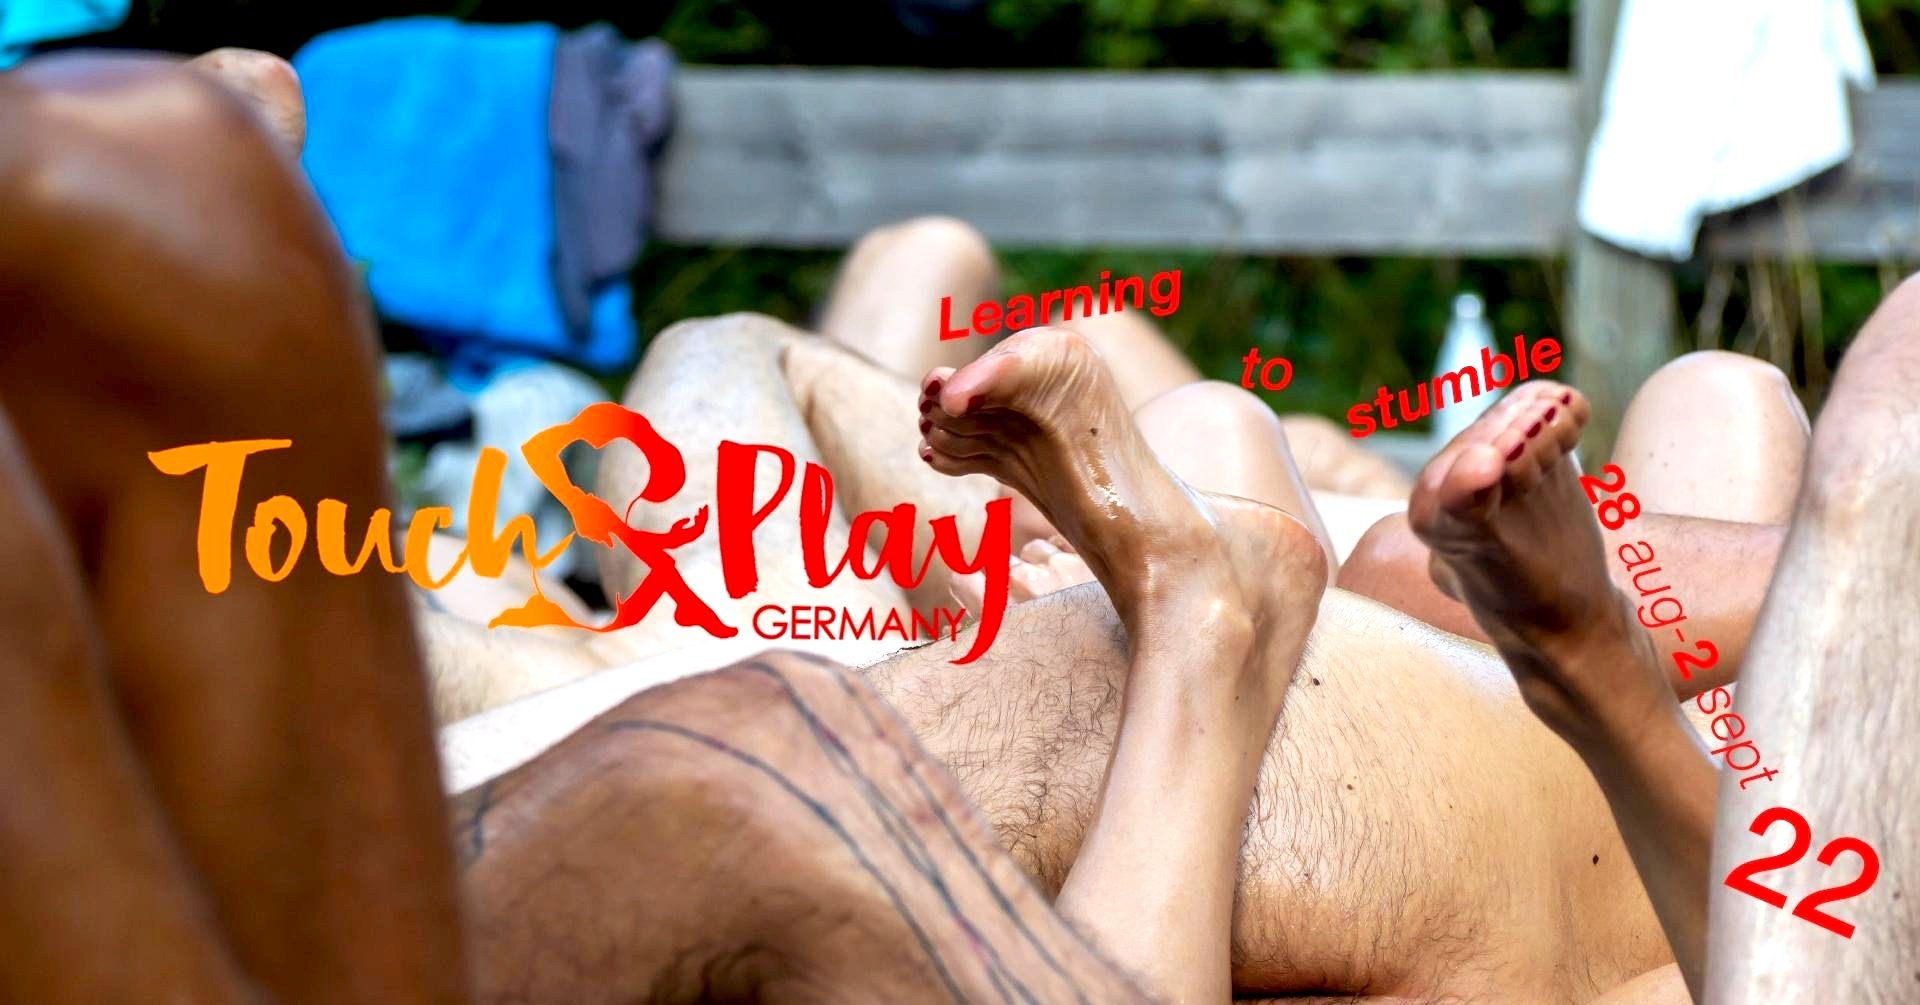 Call for proposals for touch & play Germany 2022!